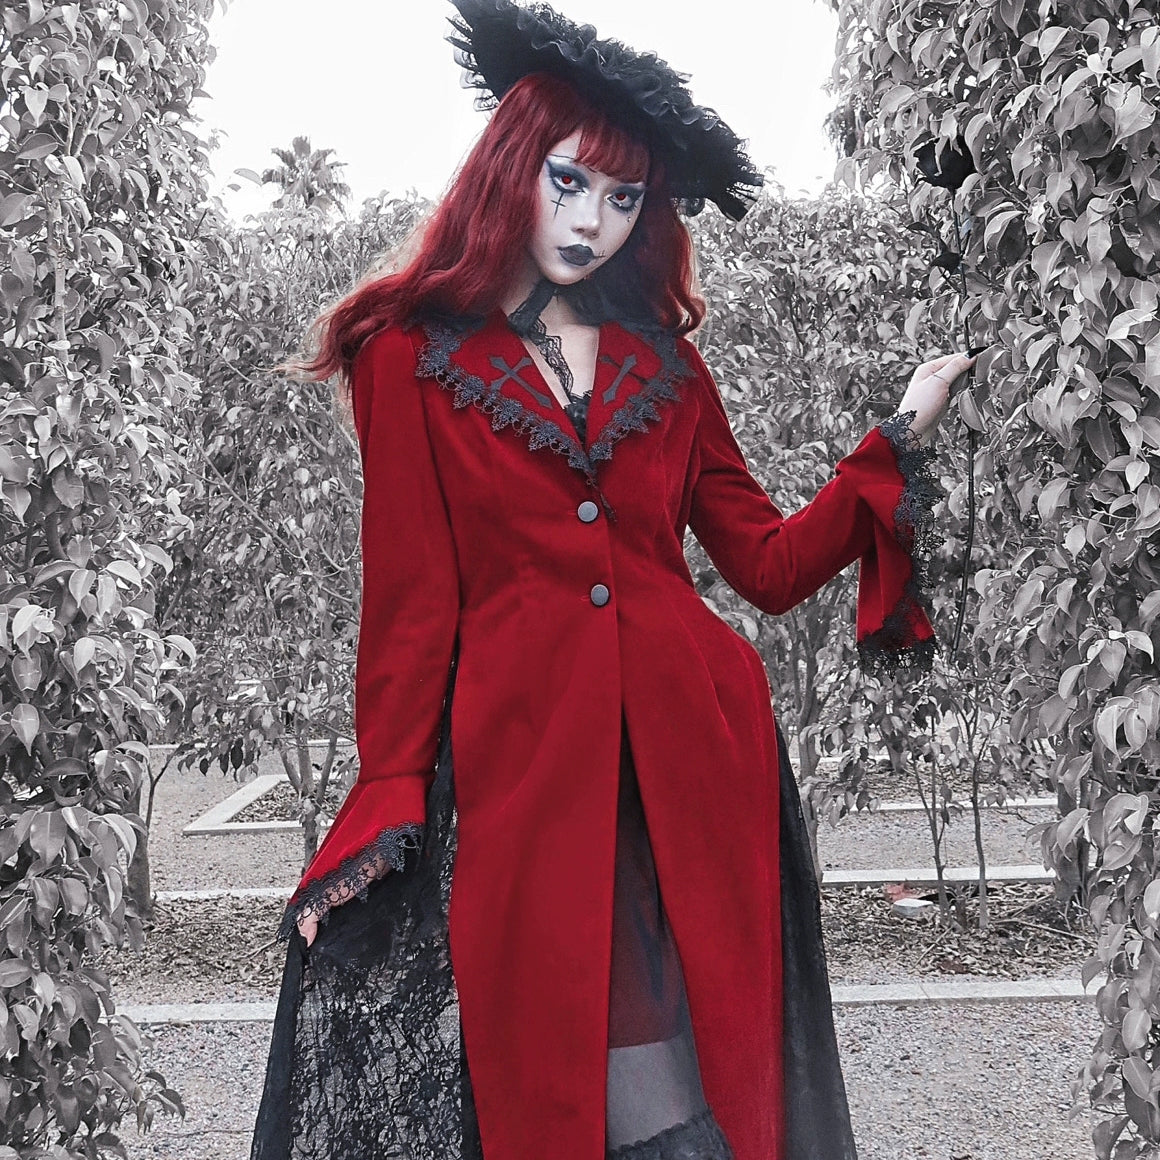 Vampire Lace Red-Black Gothic Flat Hat